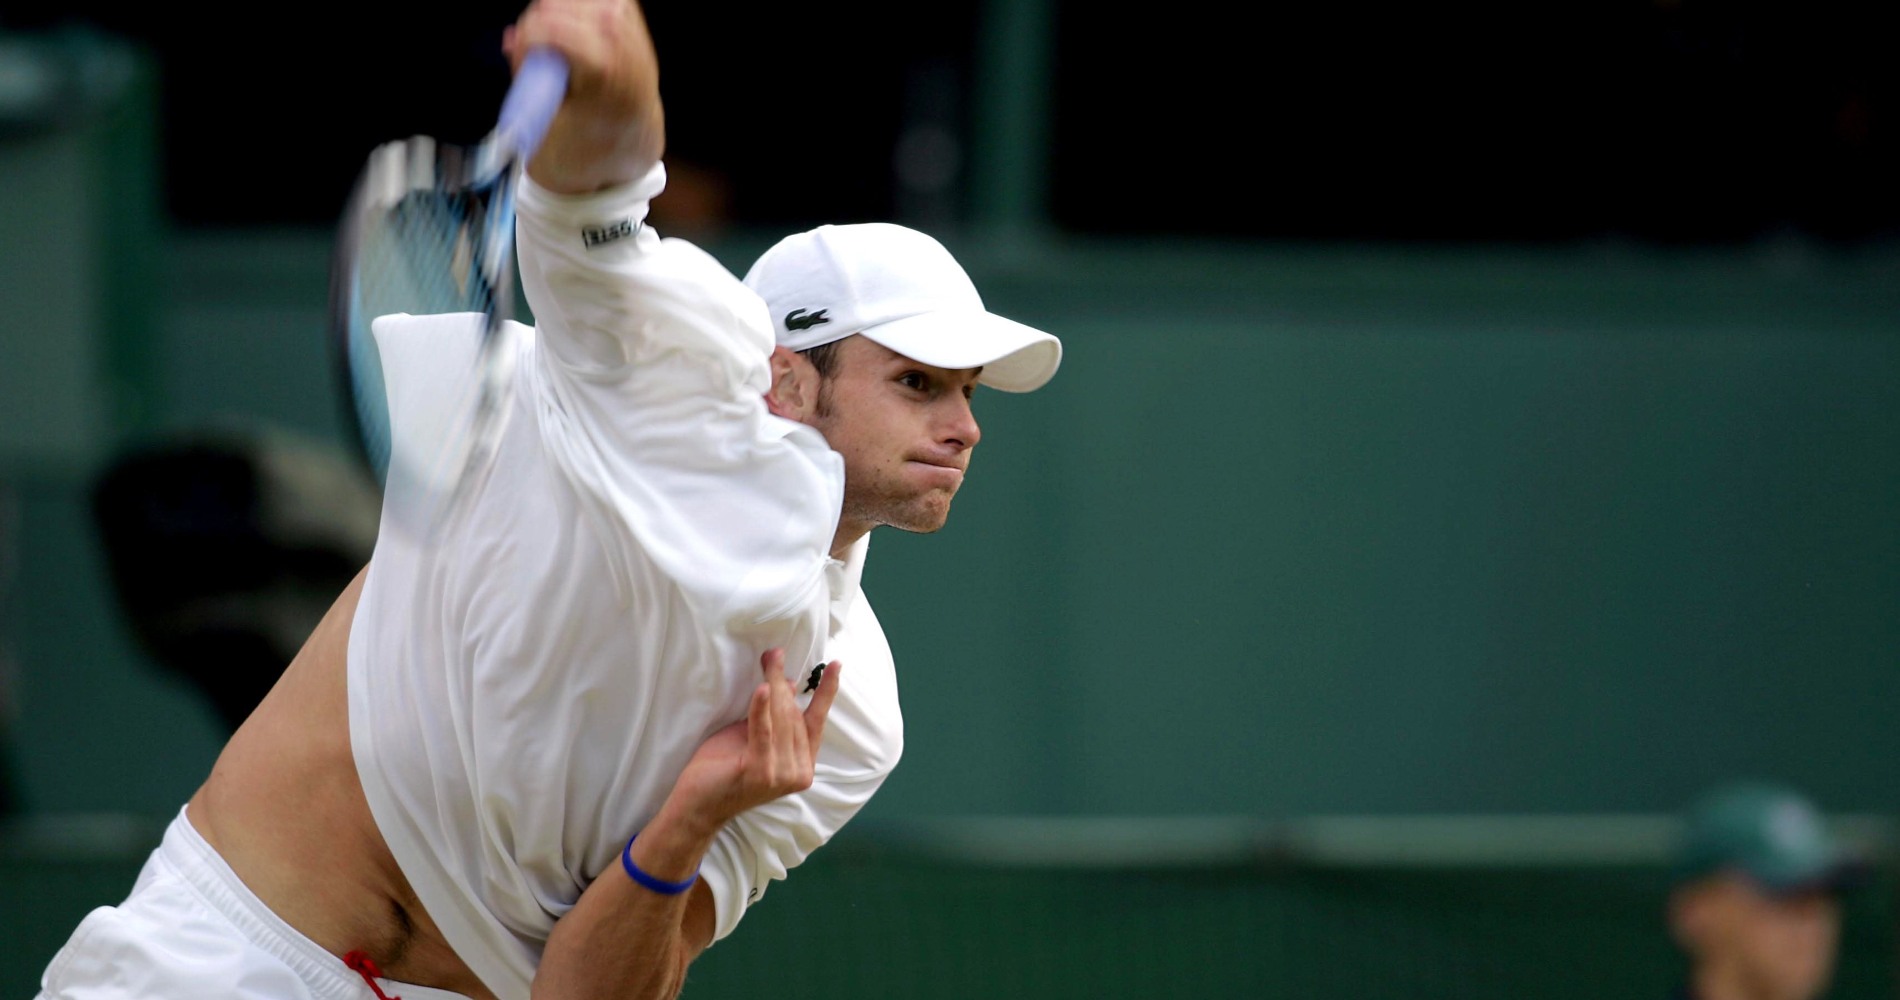 Andy Roddick - On this day